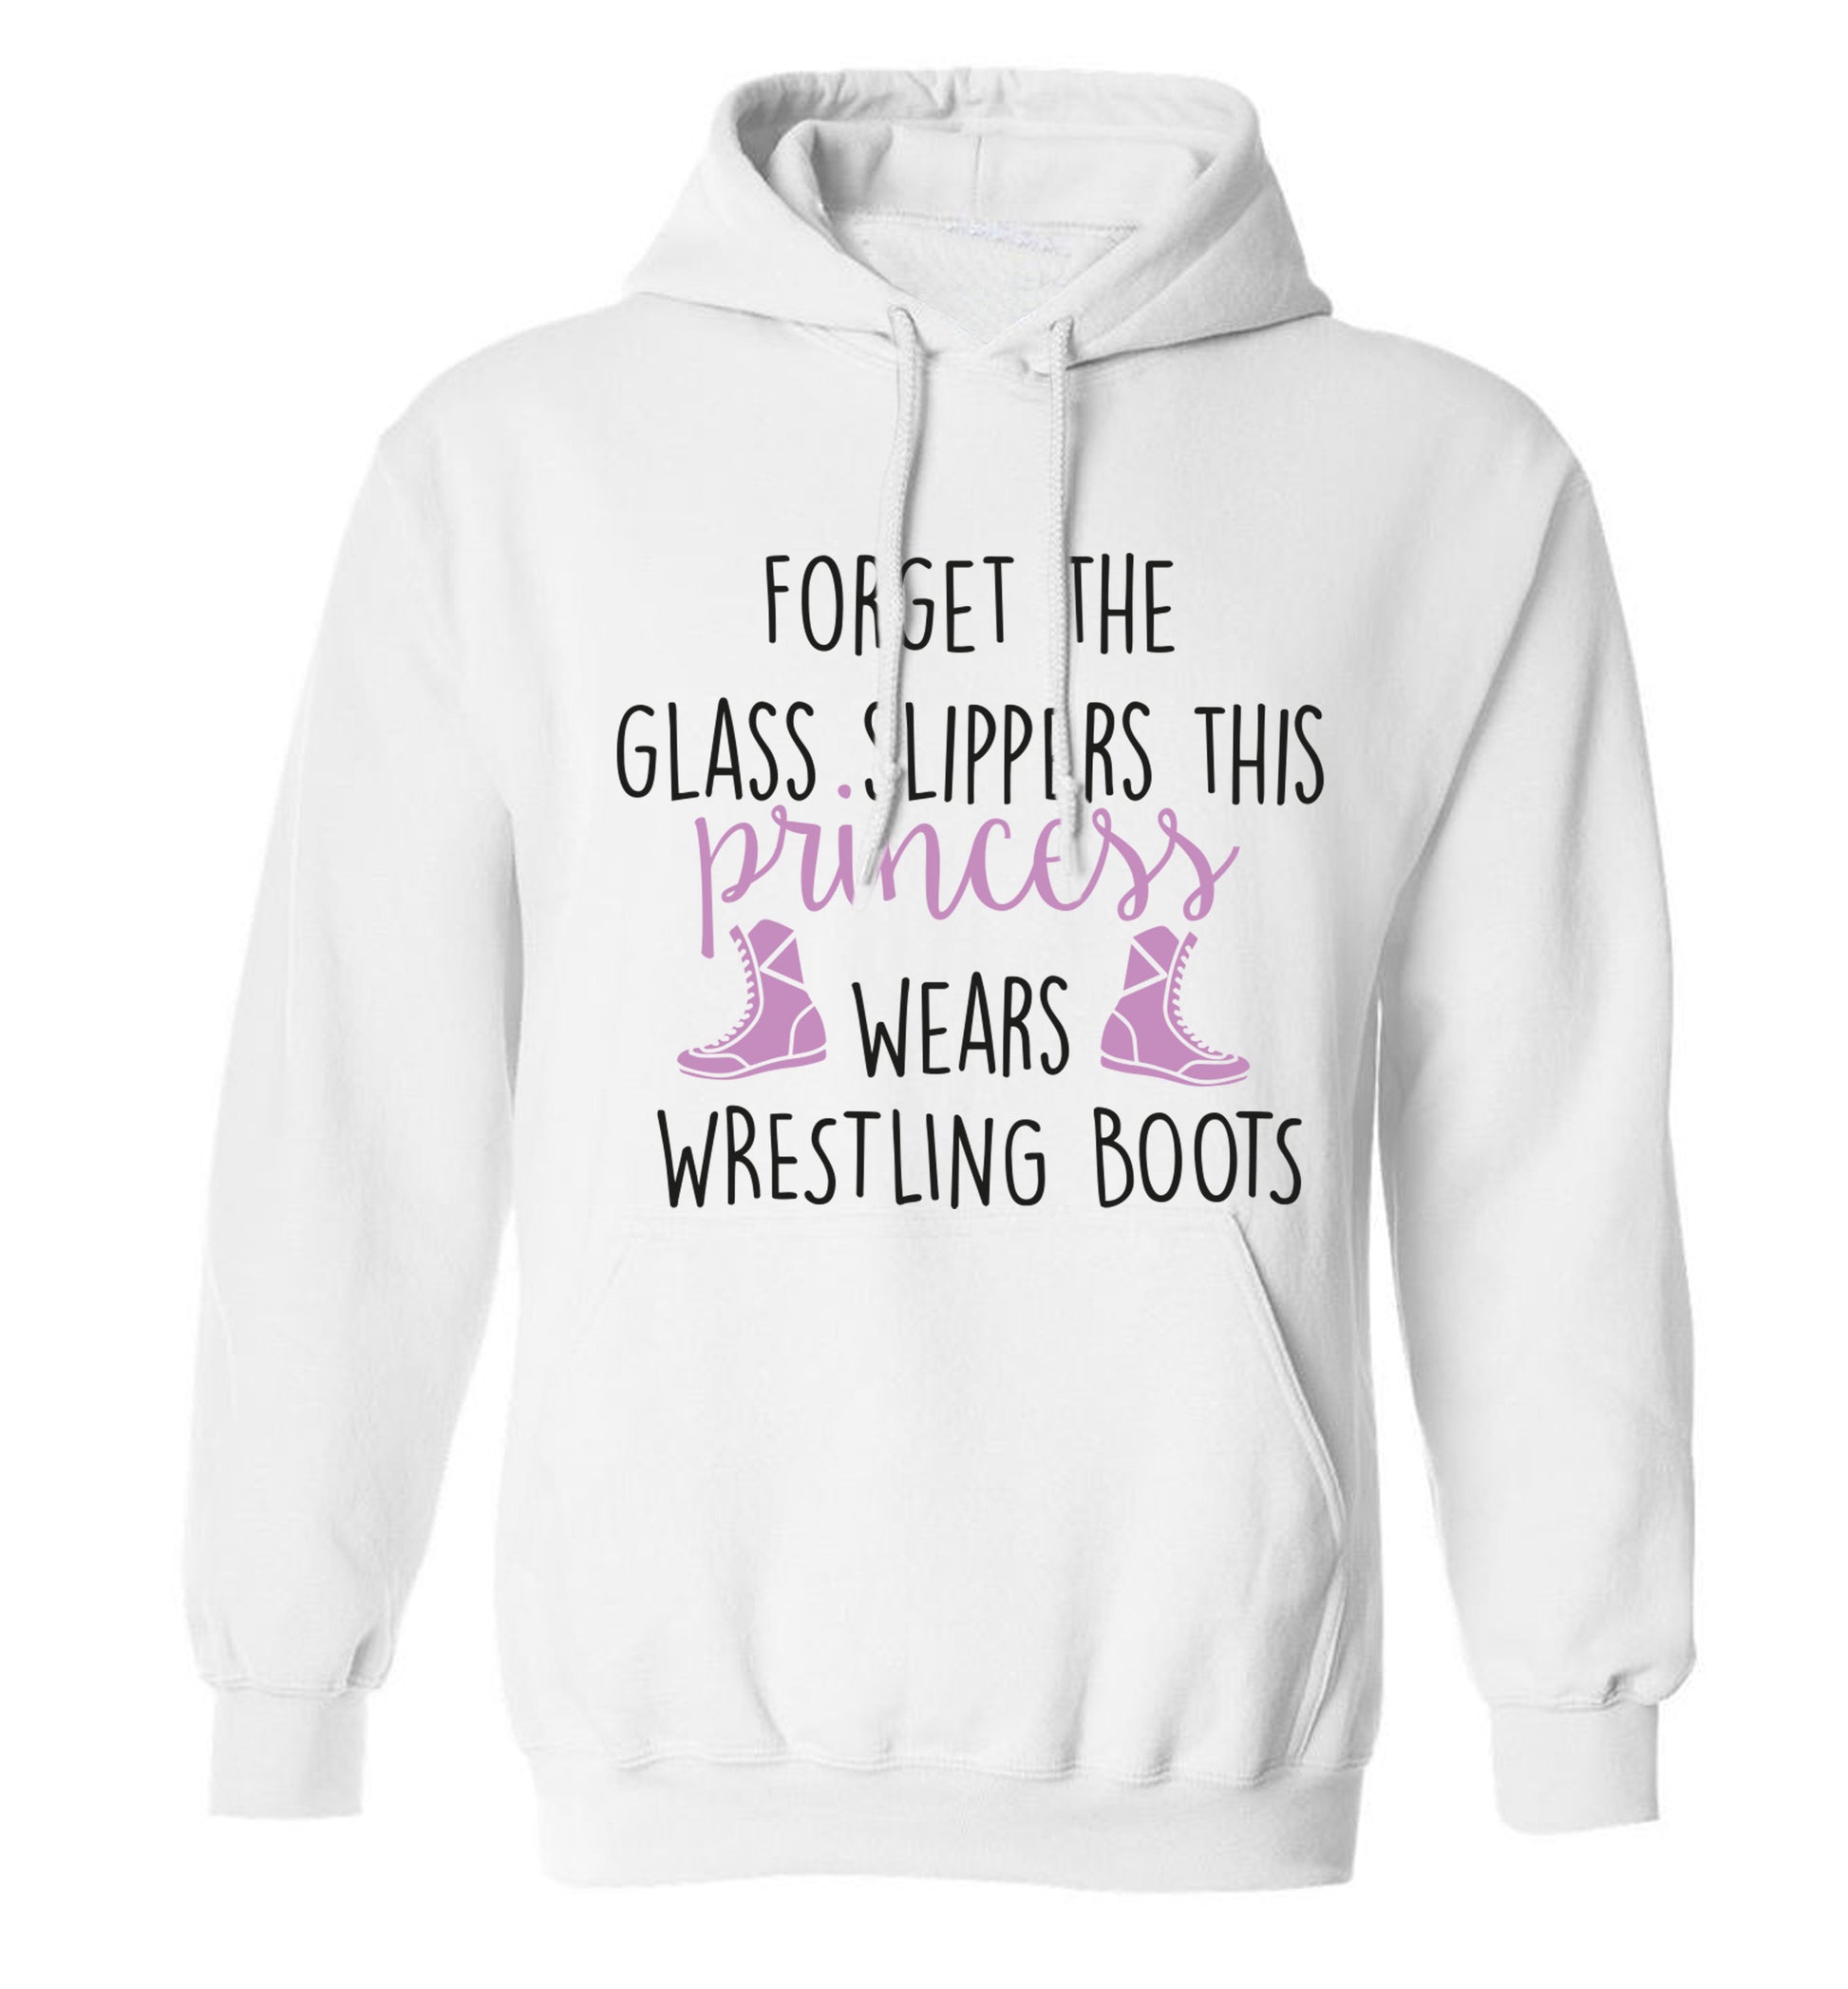 Forget the glass slippers this princess wears wrestling boots adults unisex white hoodie 2XL